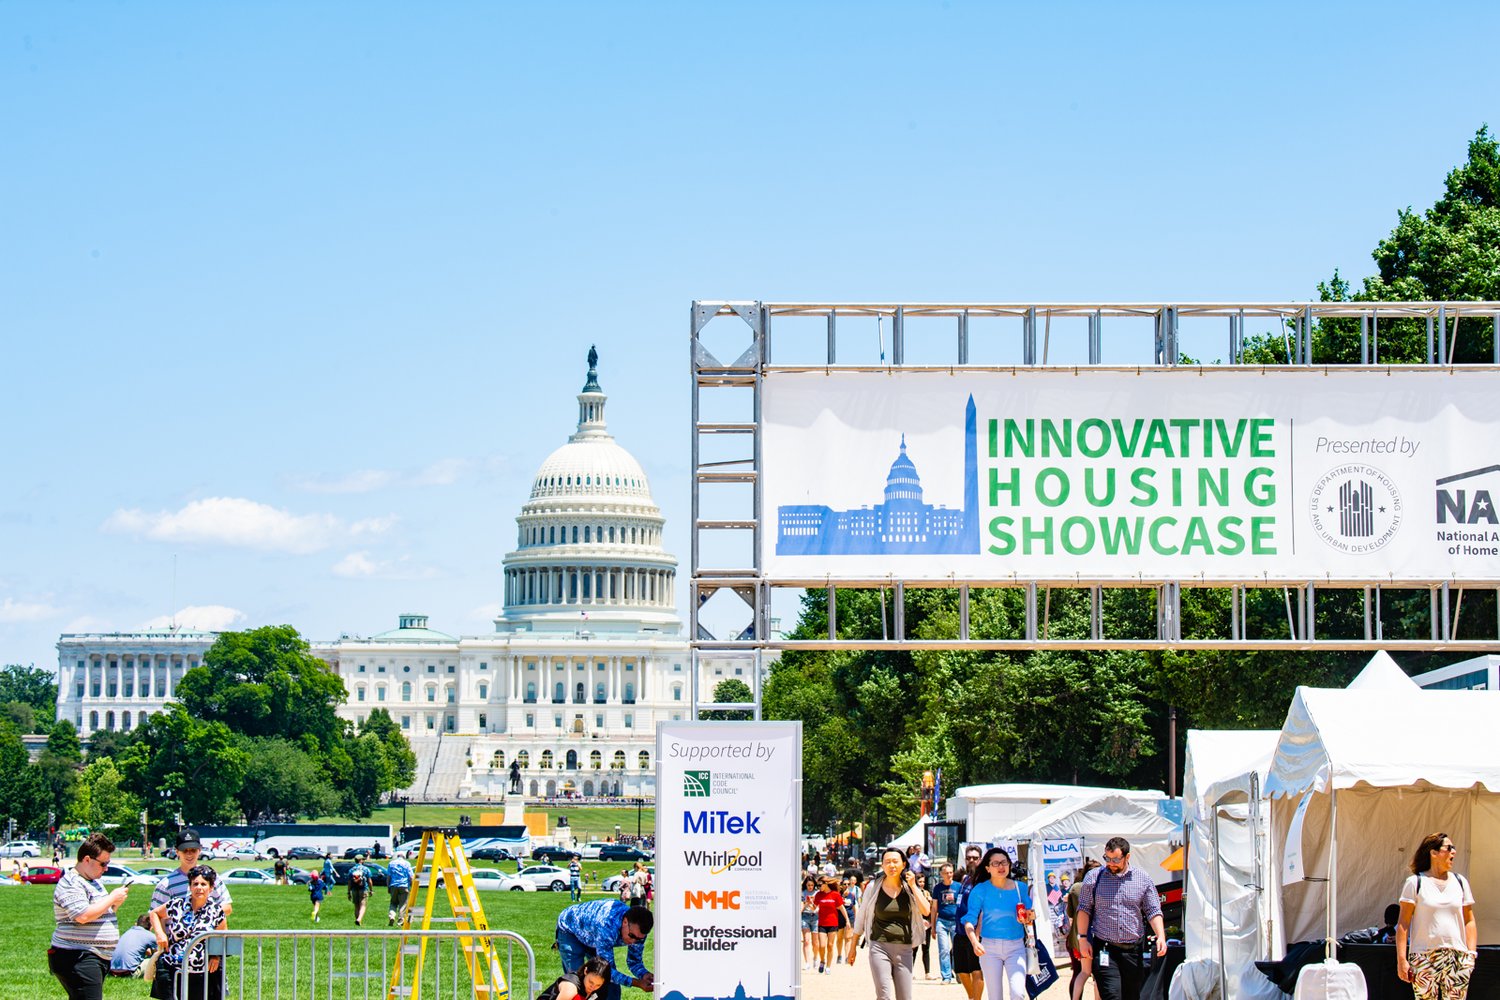 Innovative Housing Showcase on national Mall in DC 2022. Photo courtesy HUD